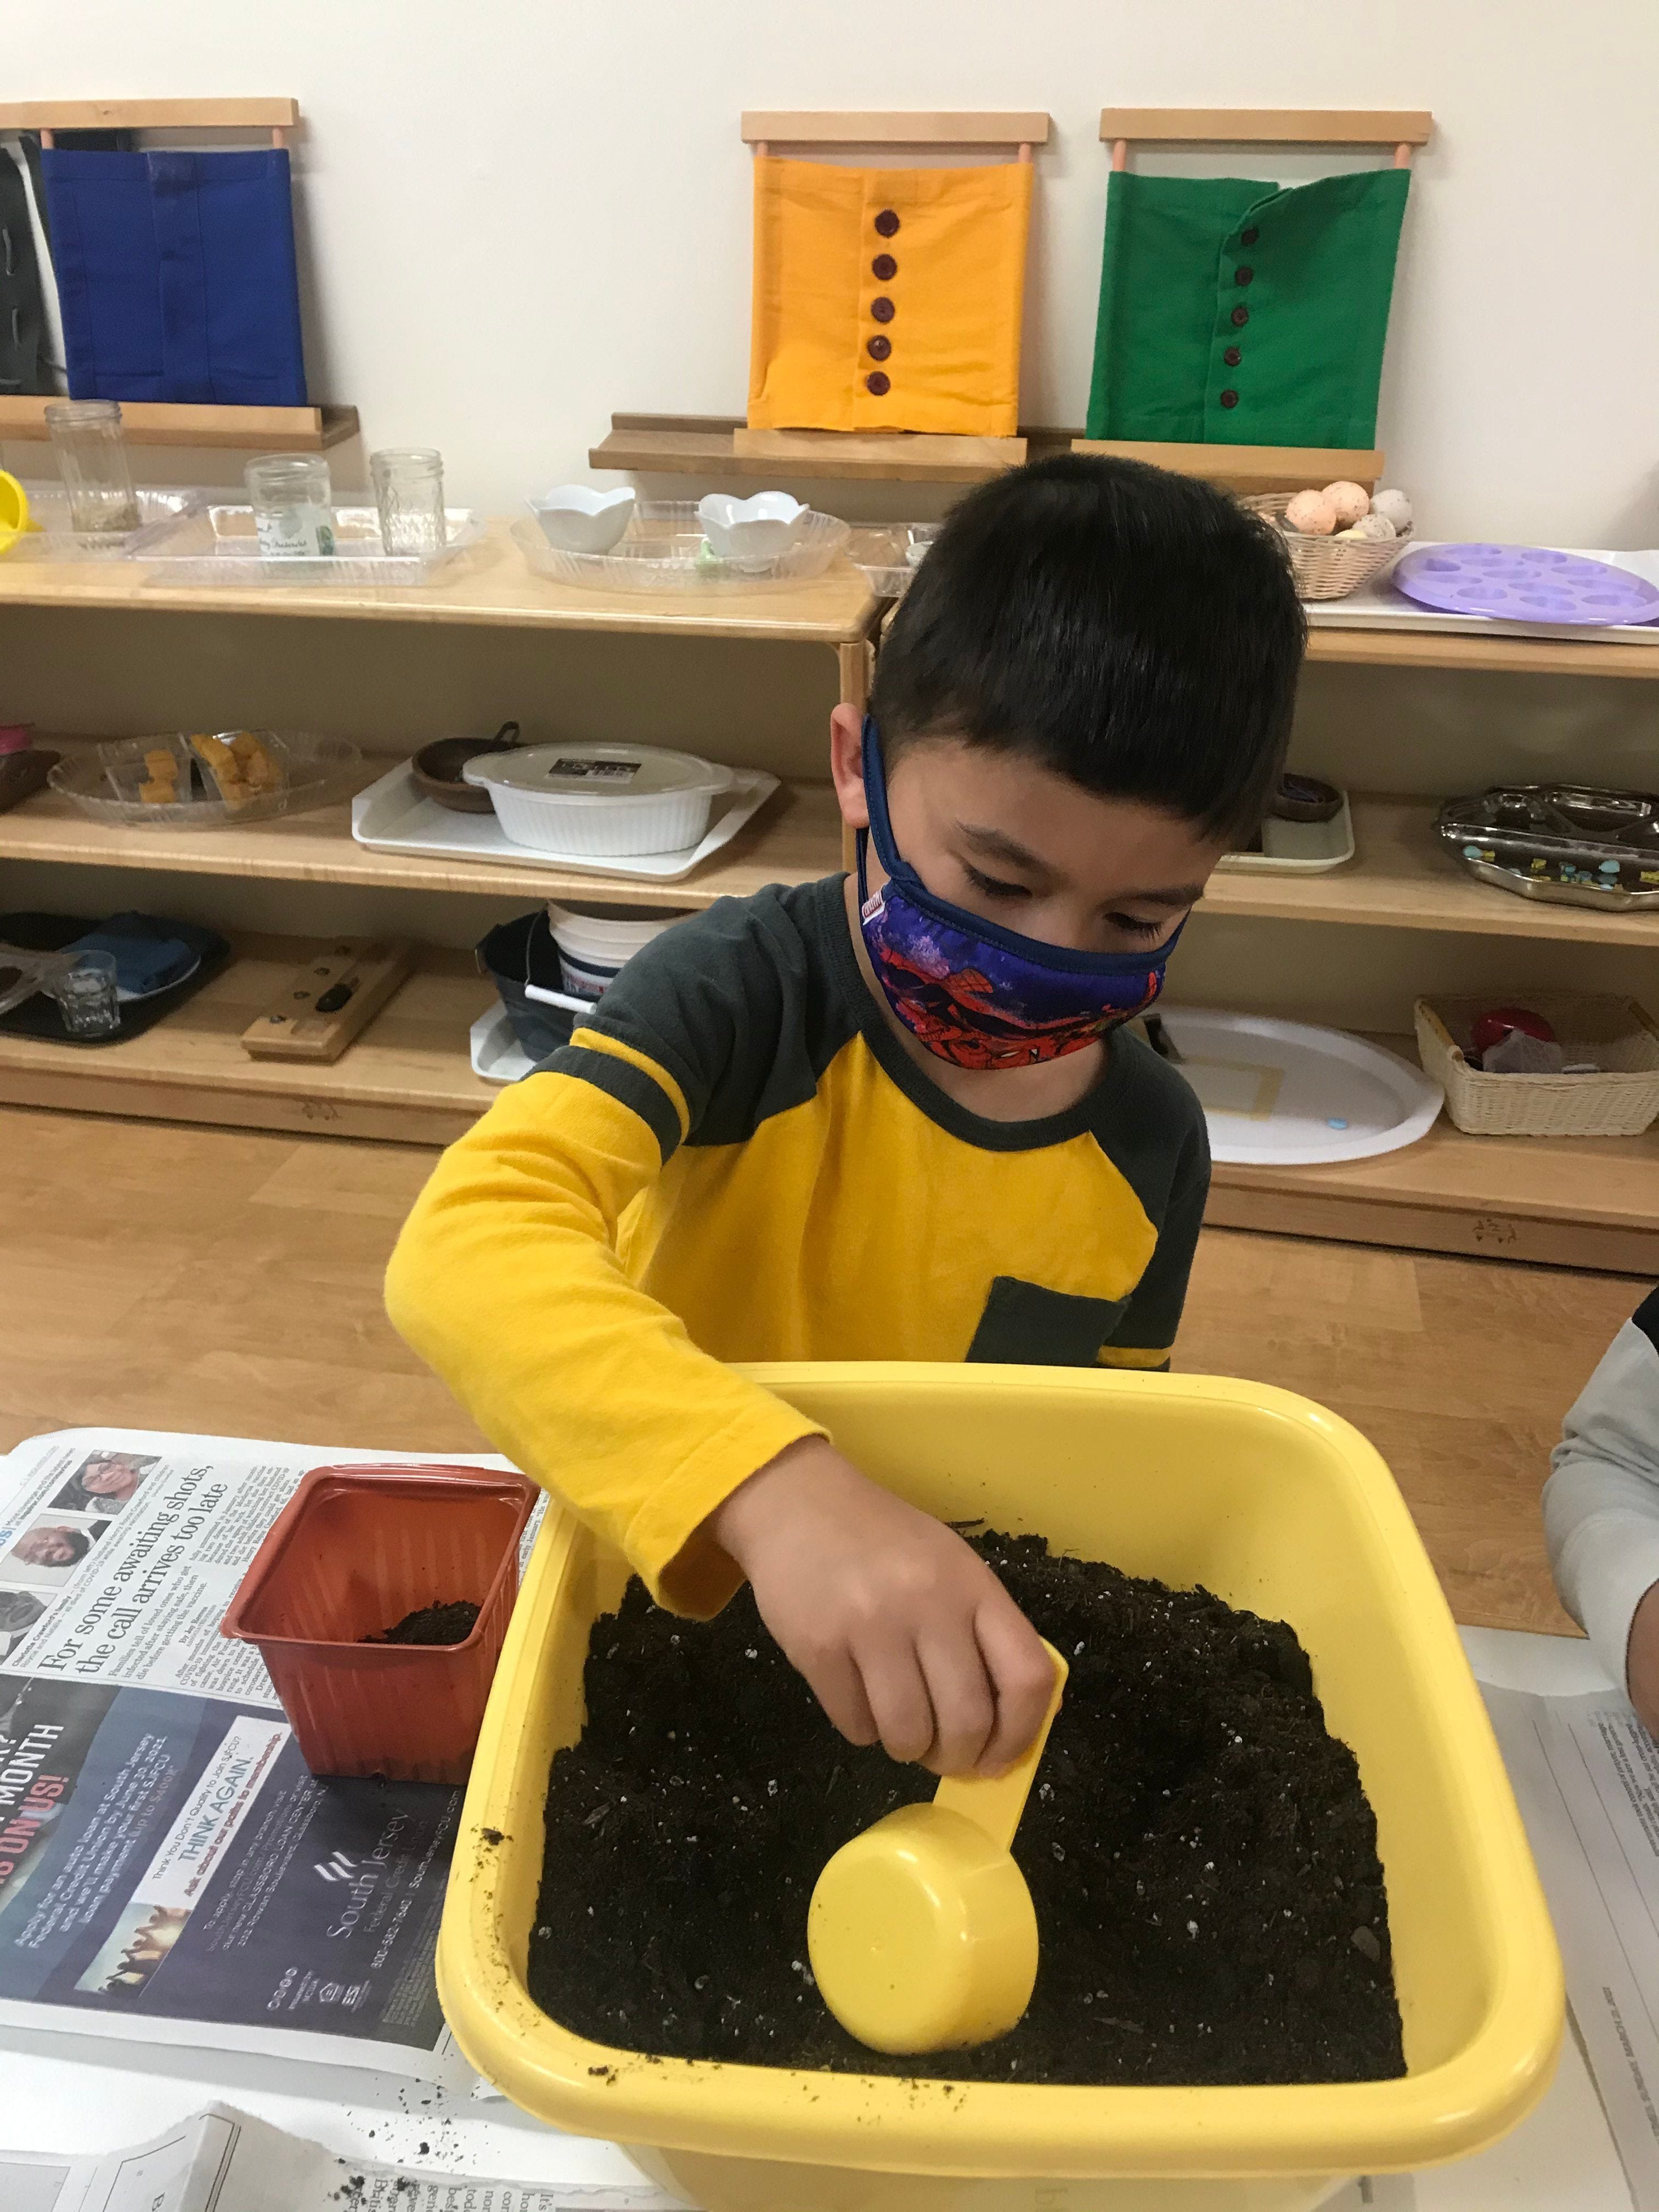 Malvern Campus: A child planting mixed flower seeds on account of Earth day.